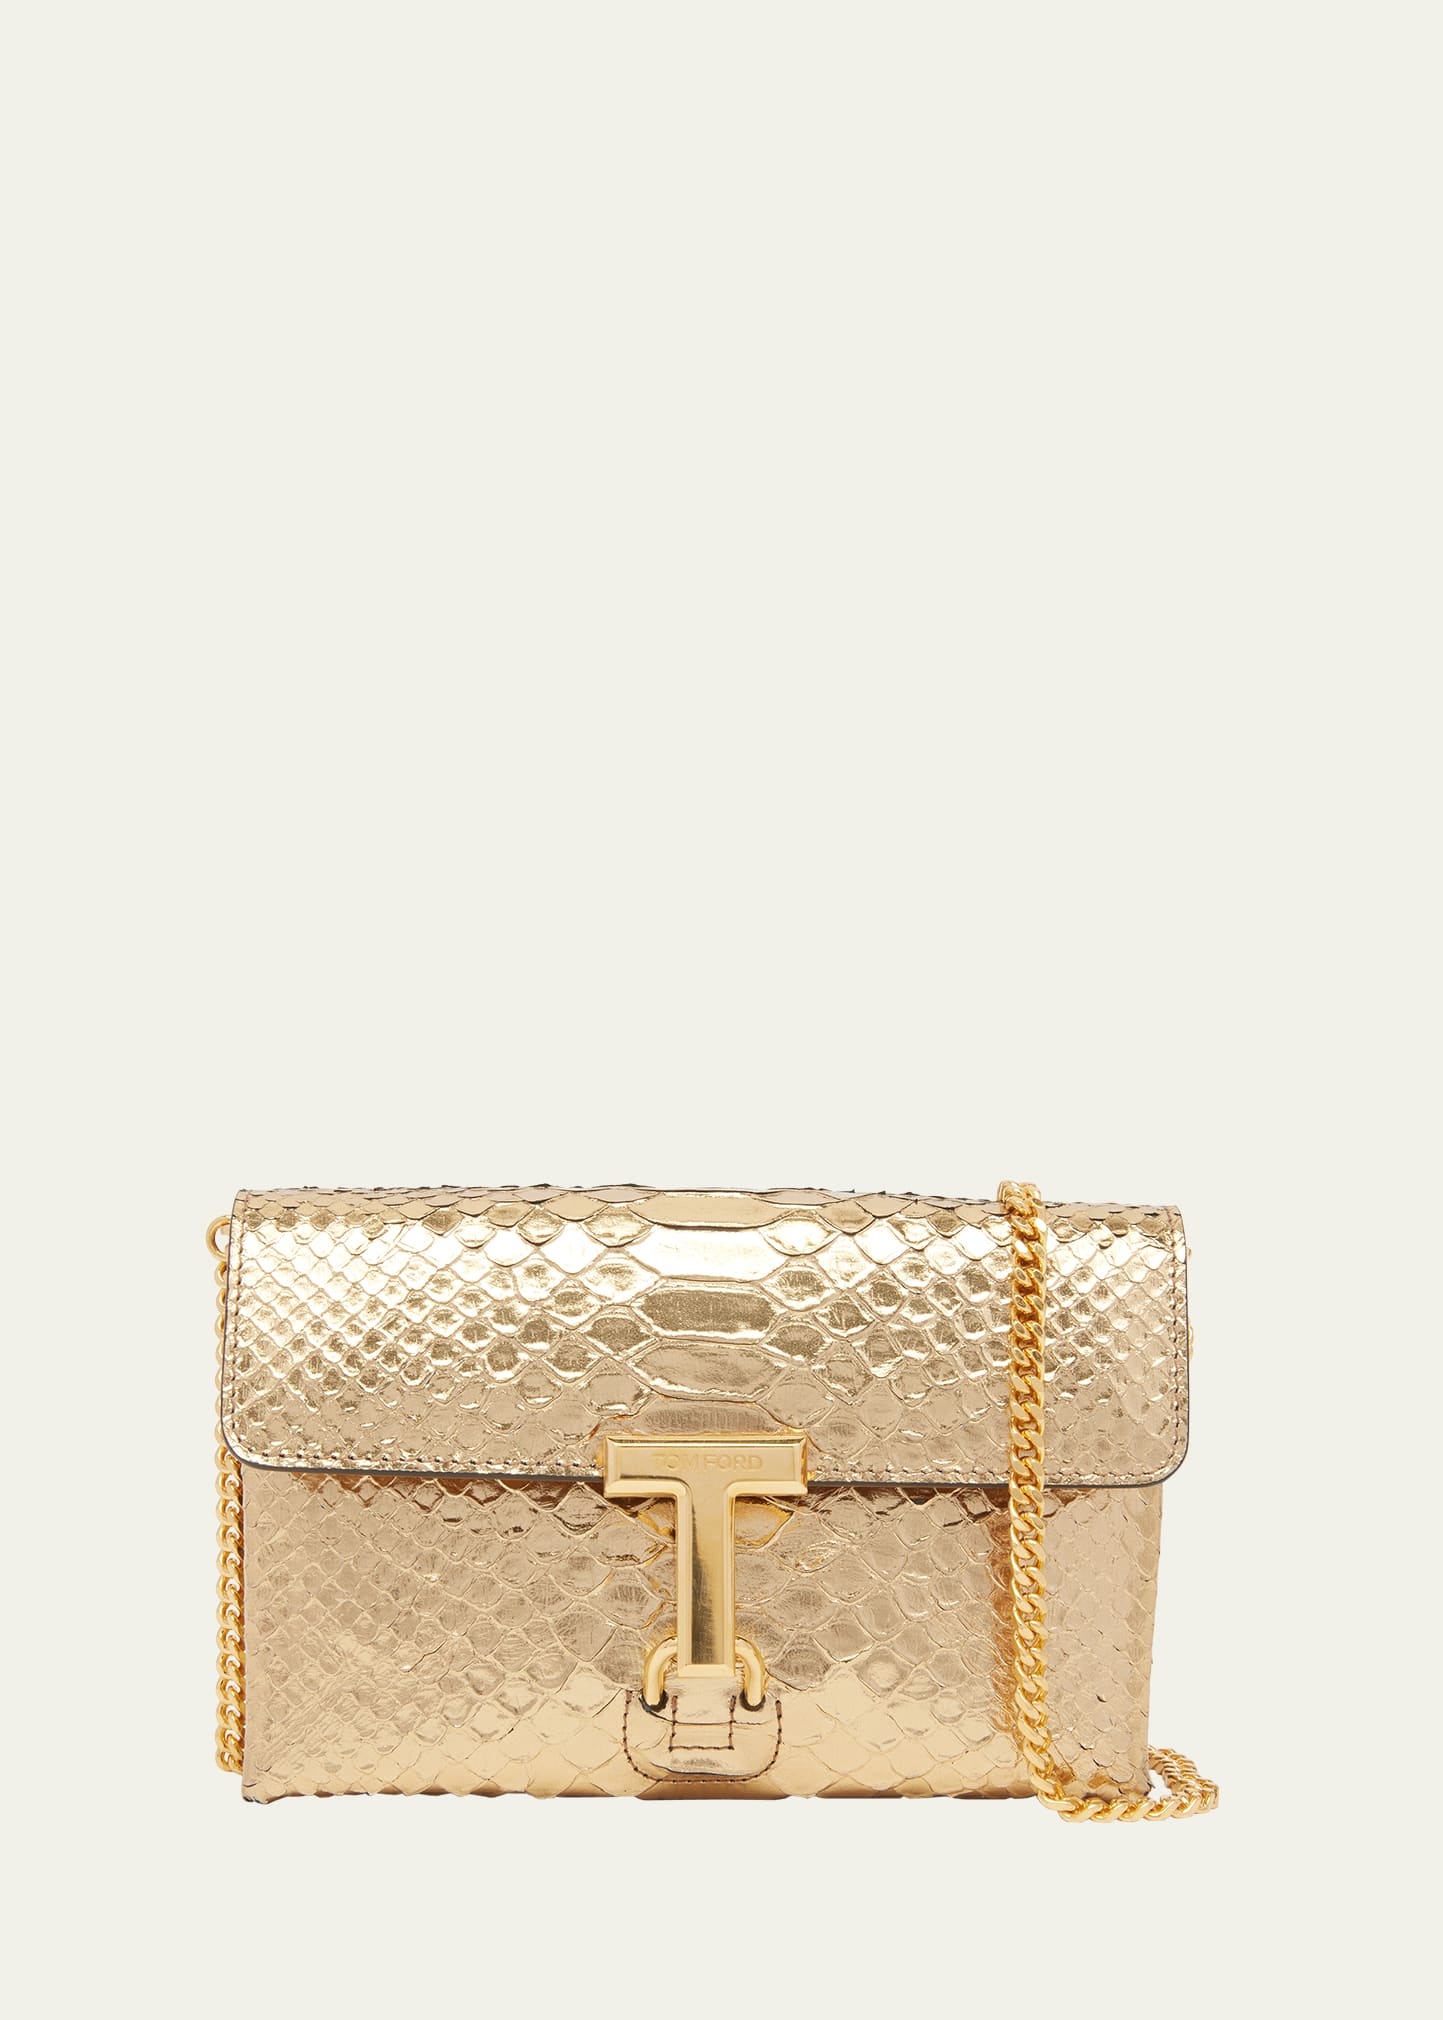 Monarch Mini Bag in Laminated Stamped Python Leather